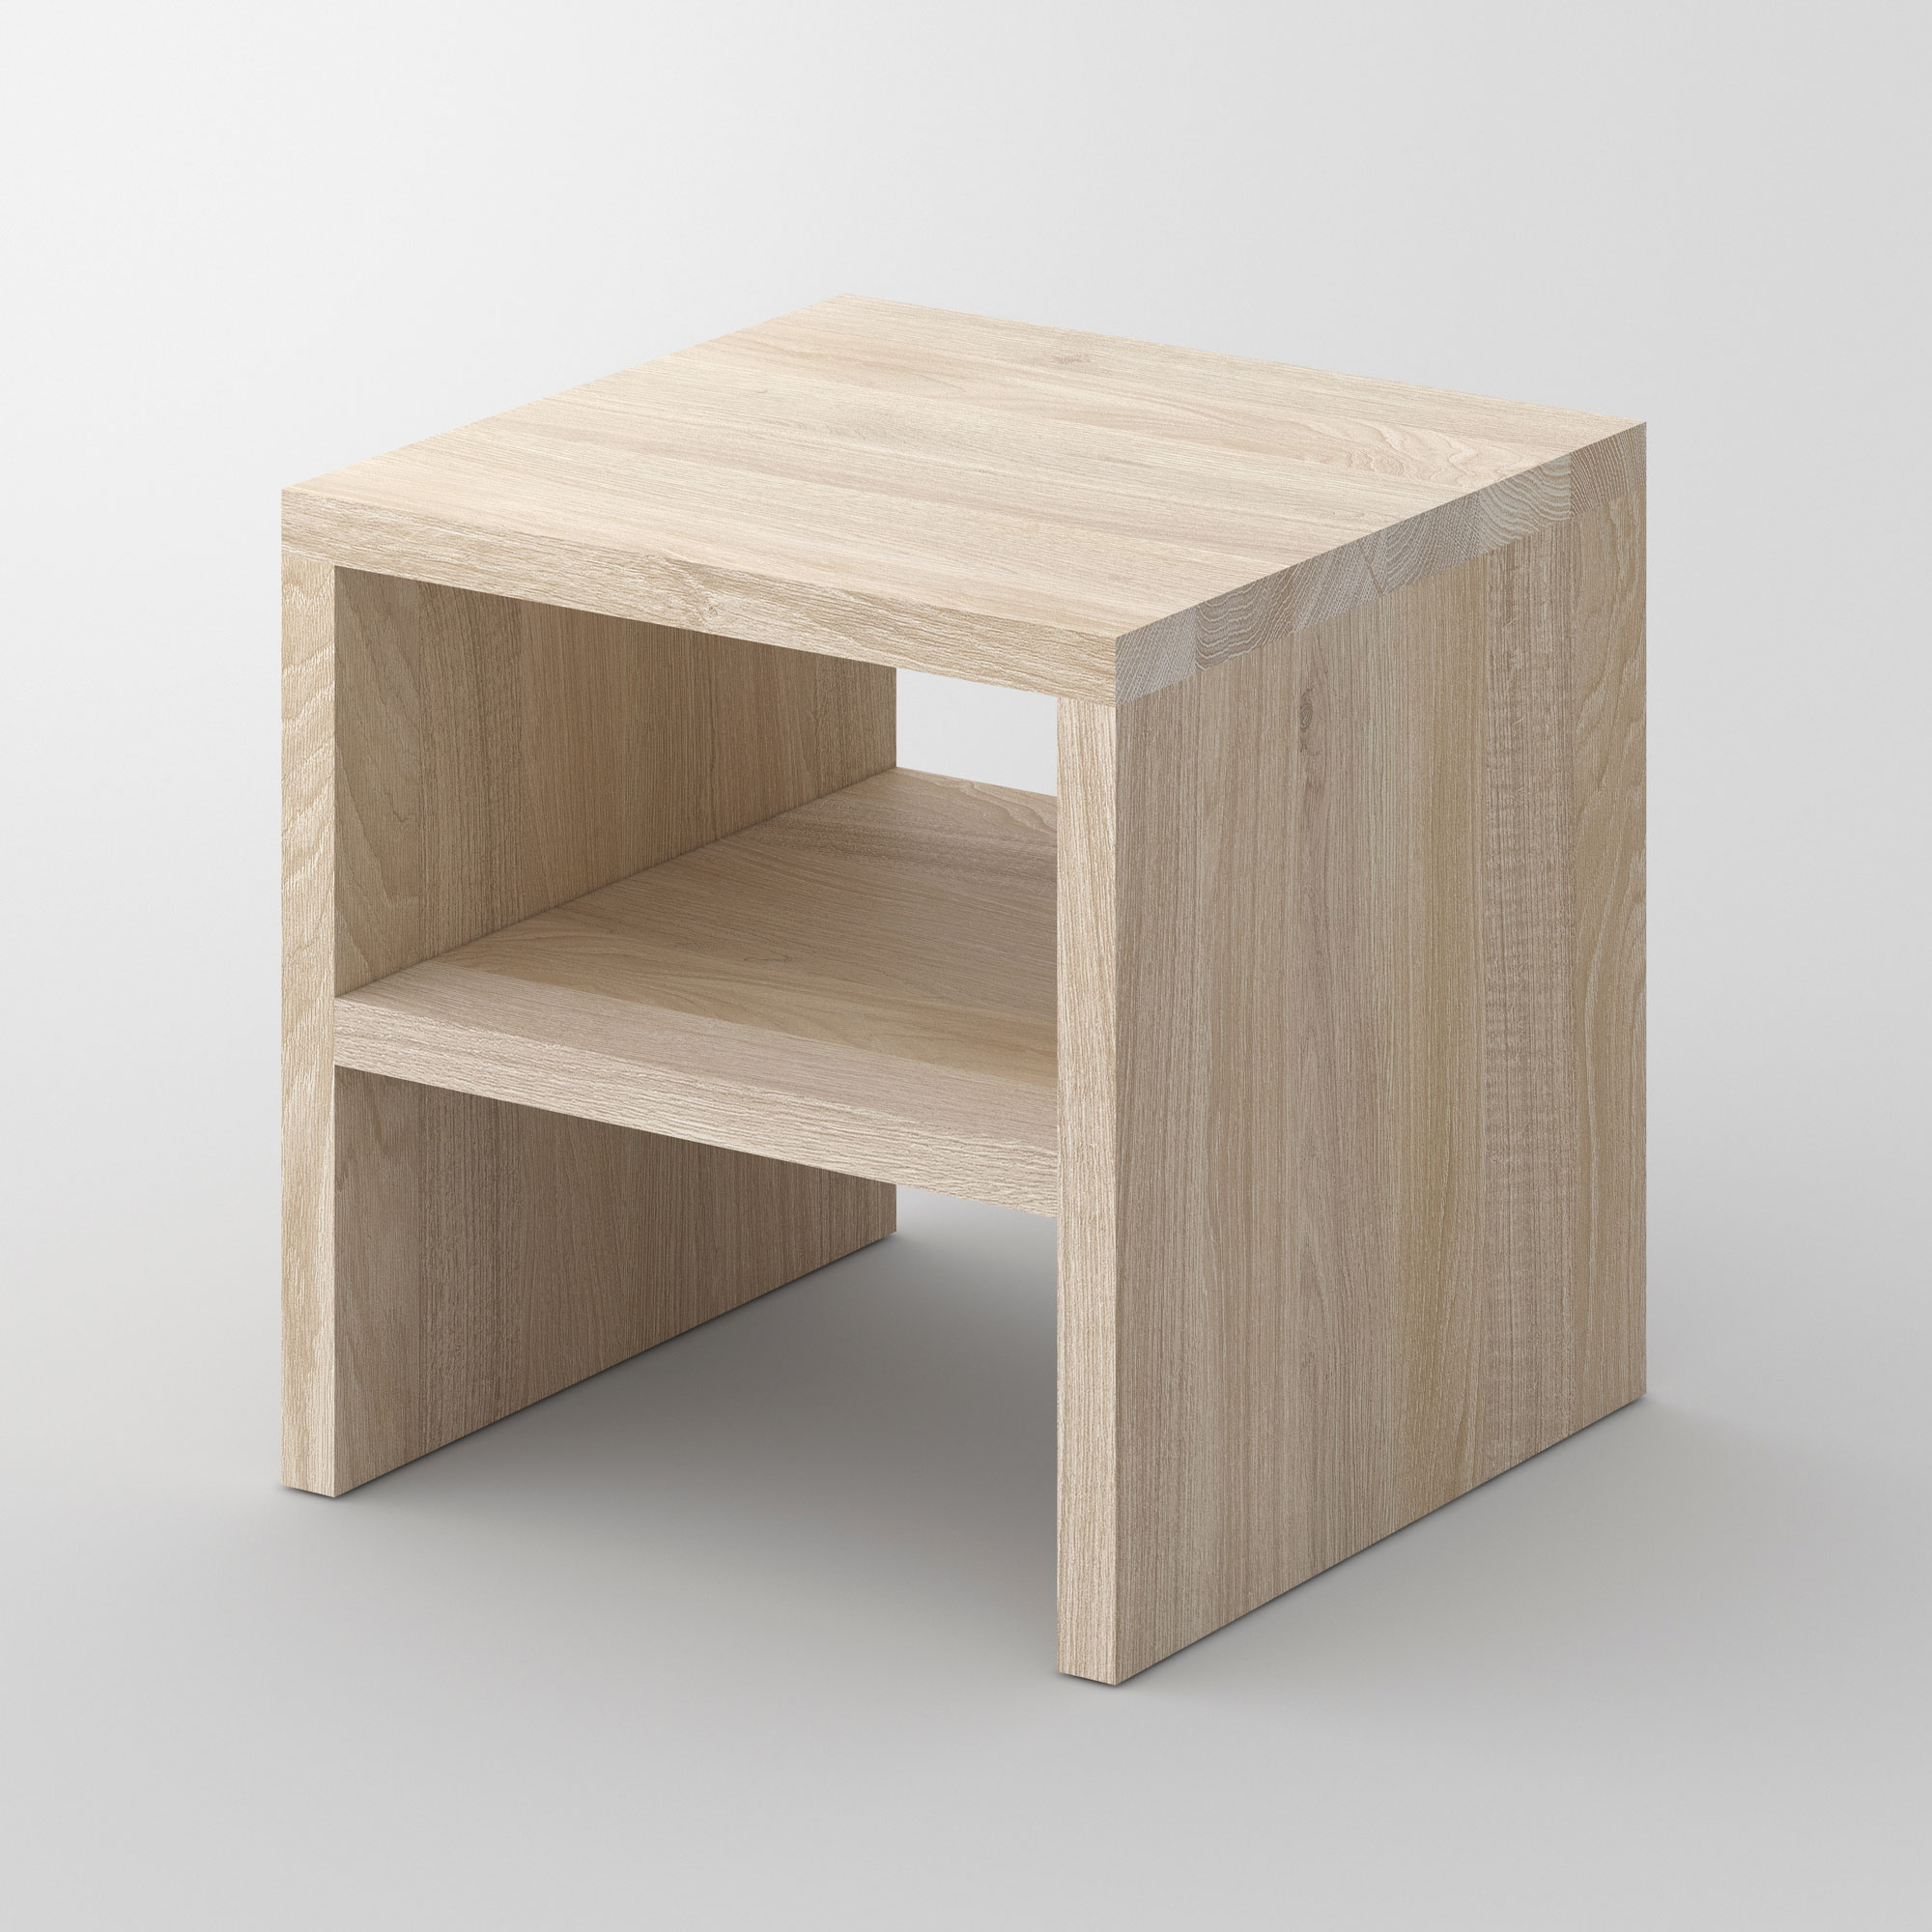 Tailor-Made Night Table MENA cam1 custom made in solid wood by vitamin design